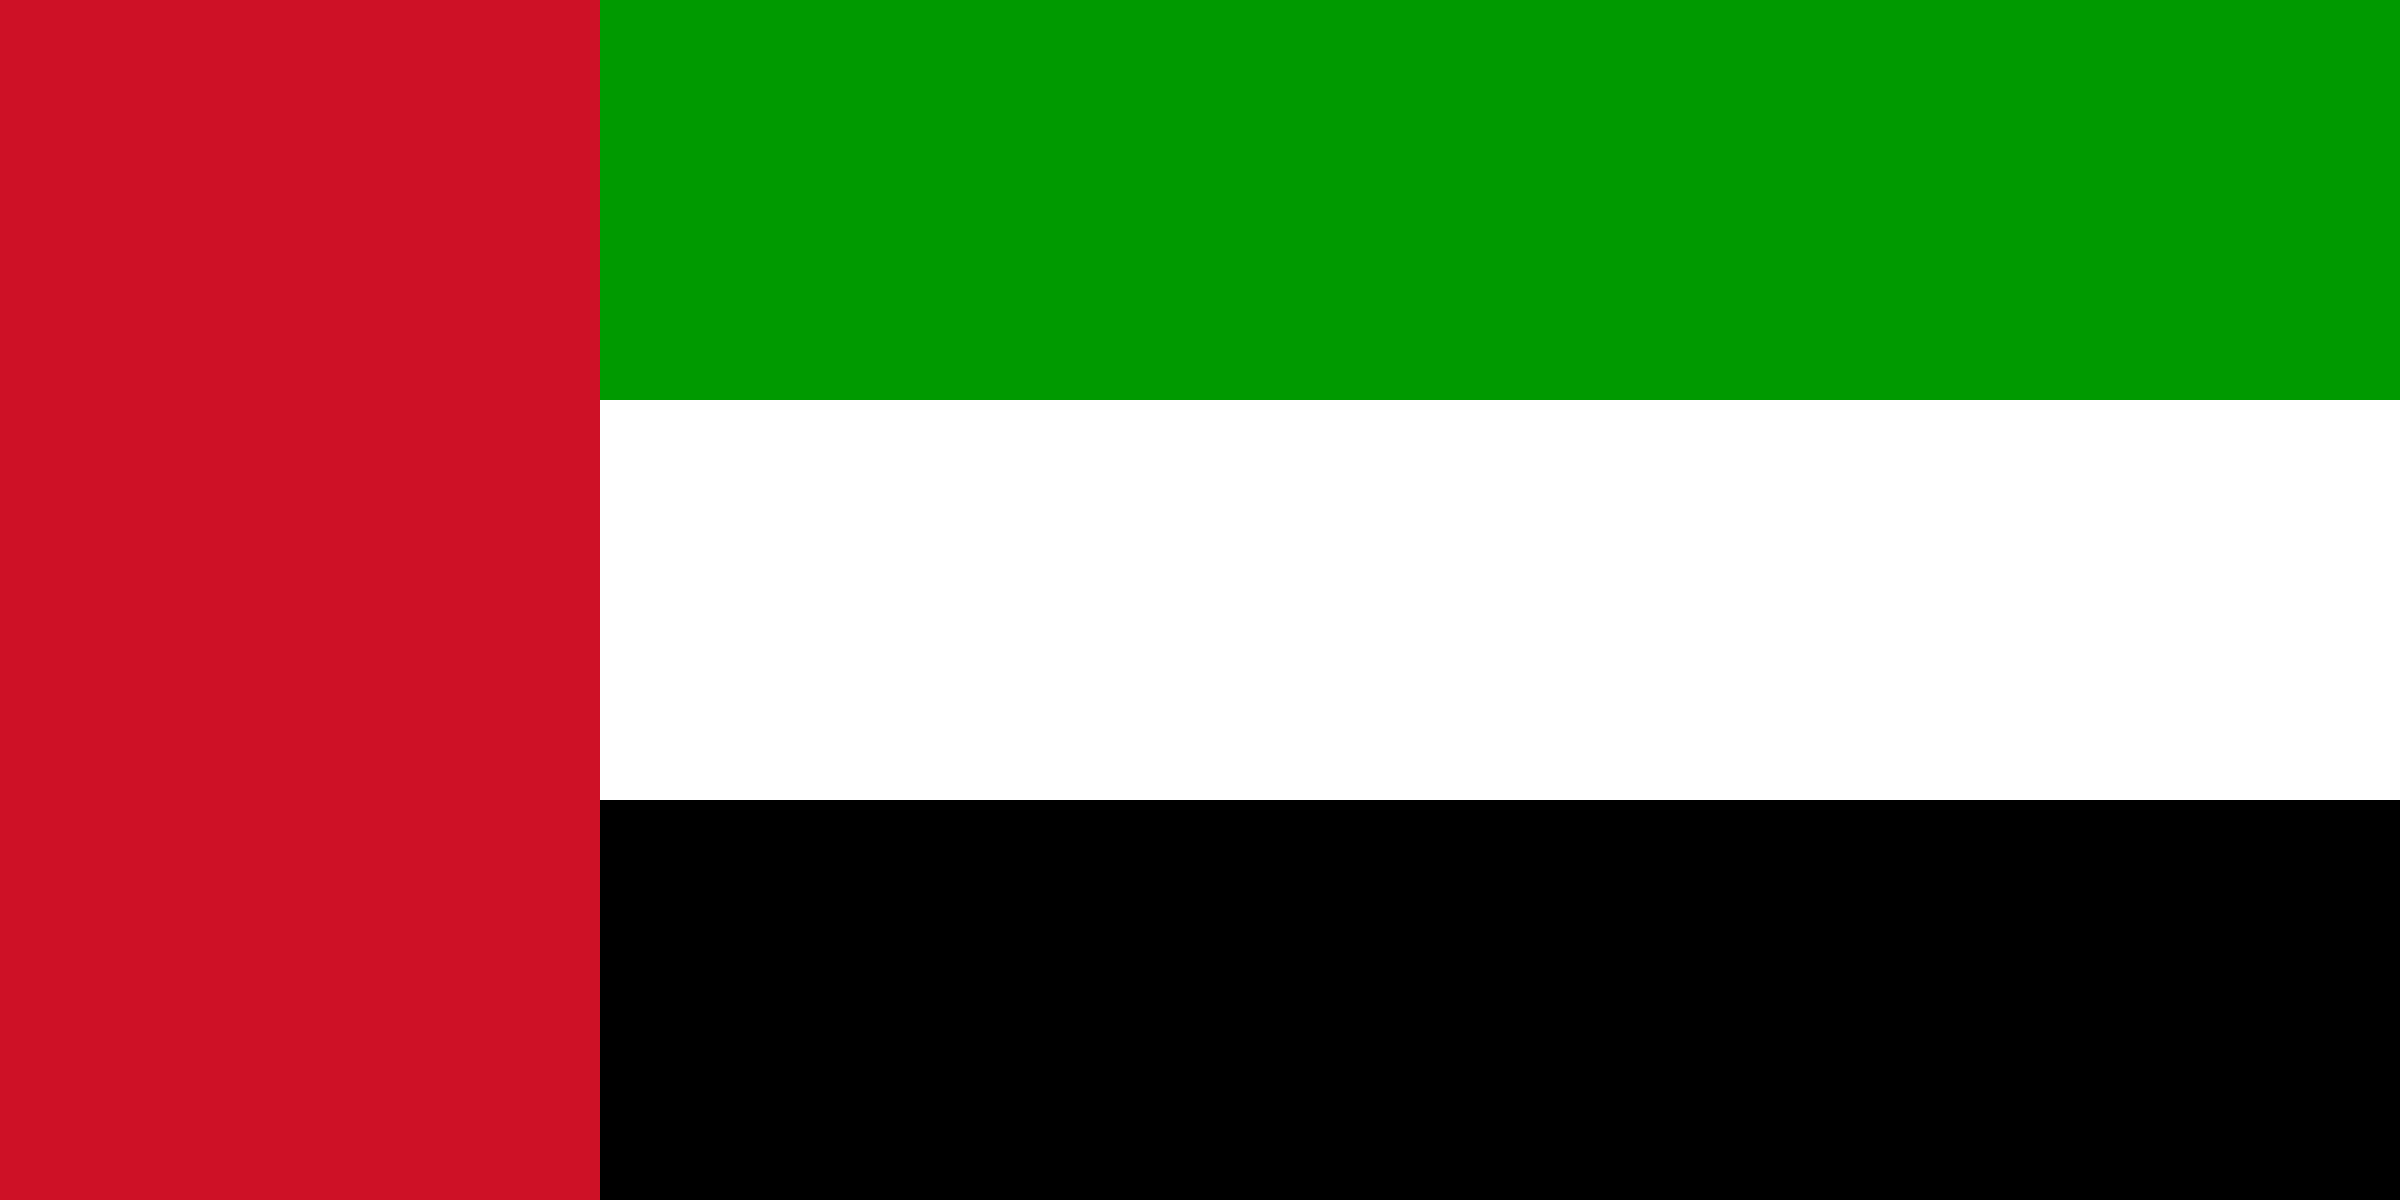 the image shows the flag of the united arab emirates